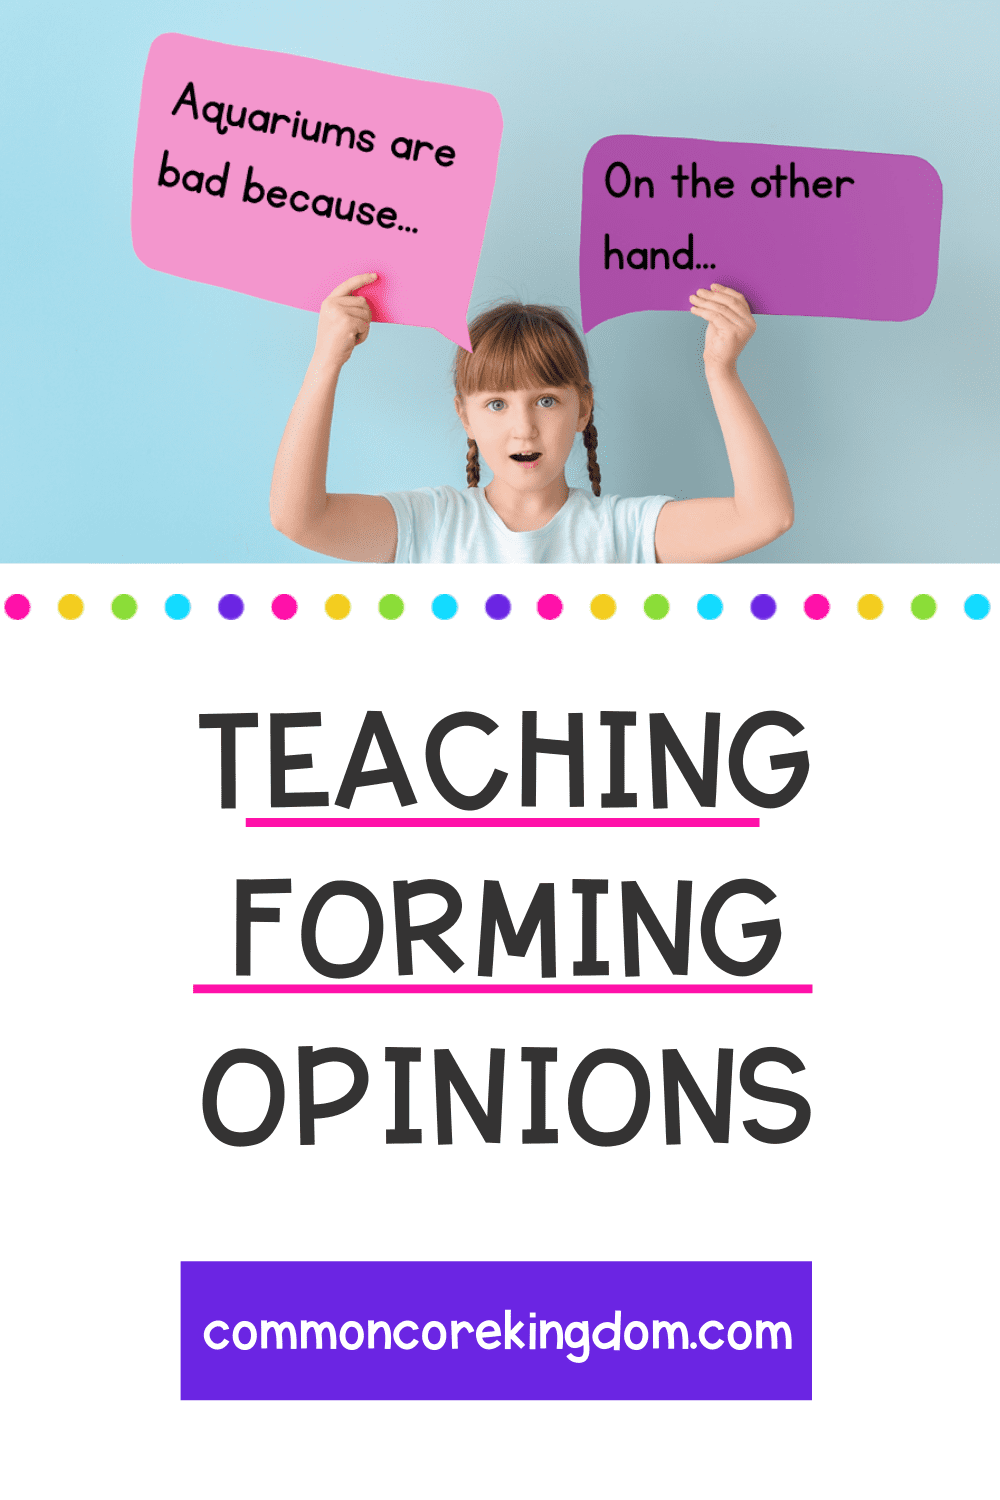 Forming Opinions and teaching students to think blog cover showing girl holding up 2 thought bubbles with text stating opinions and facts.